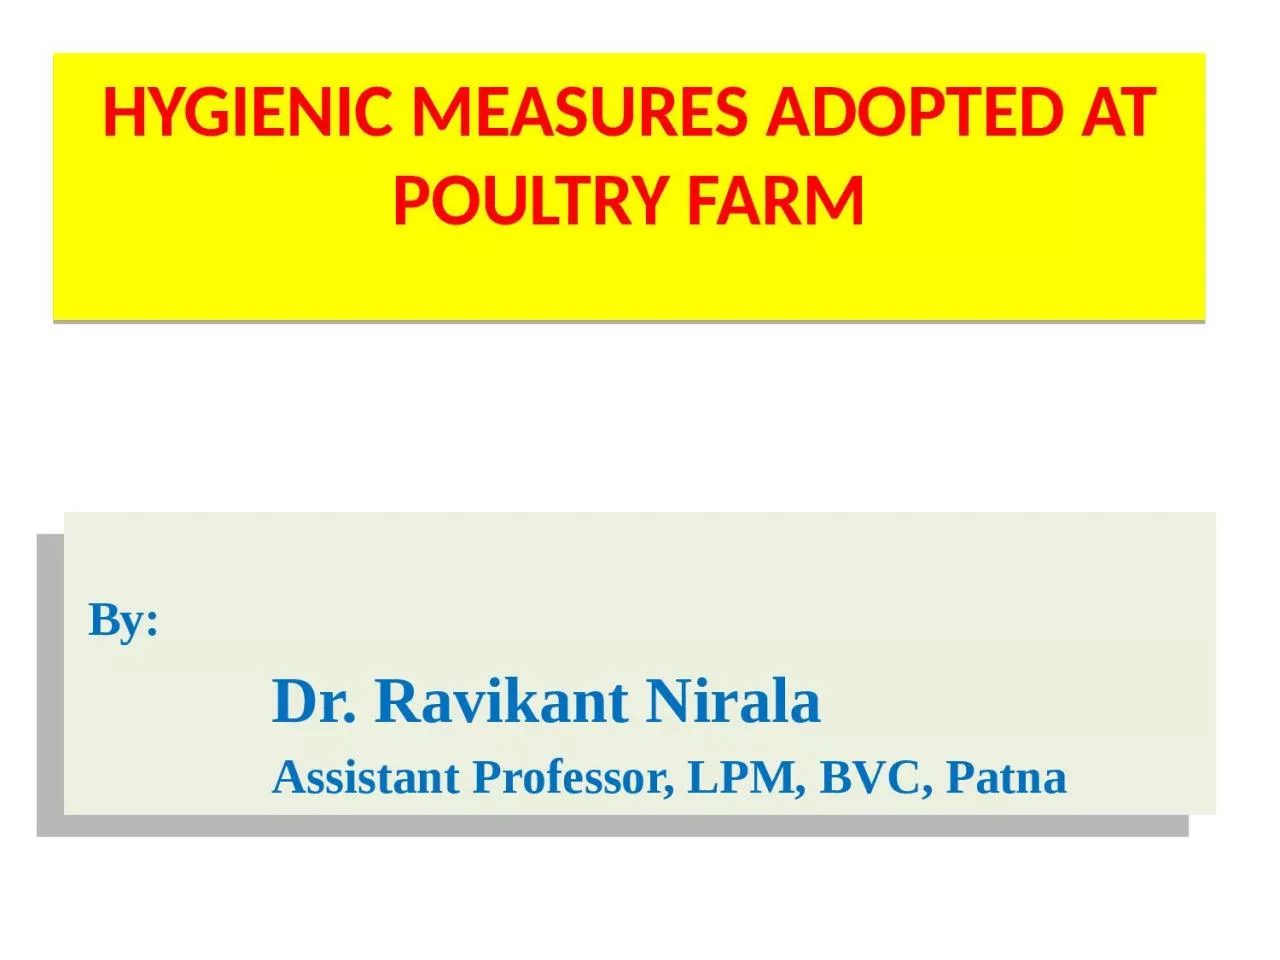 HYGIENIC MEASURES ADOPTED AT POULTRY FARM